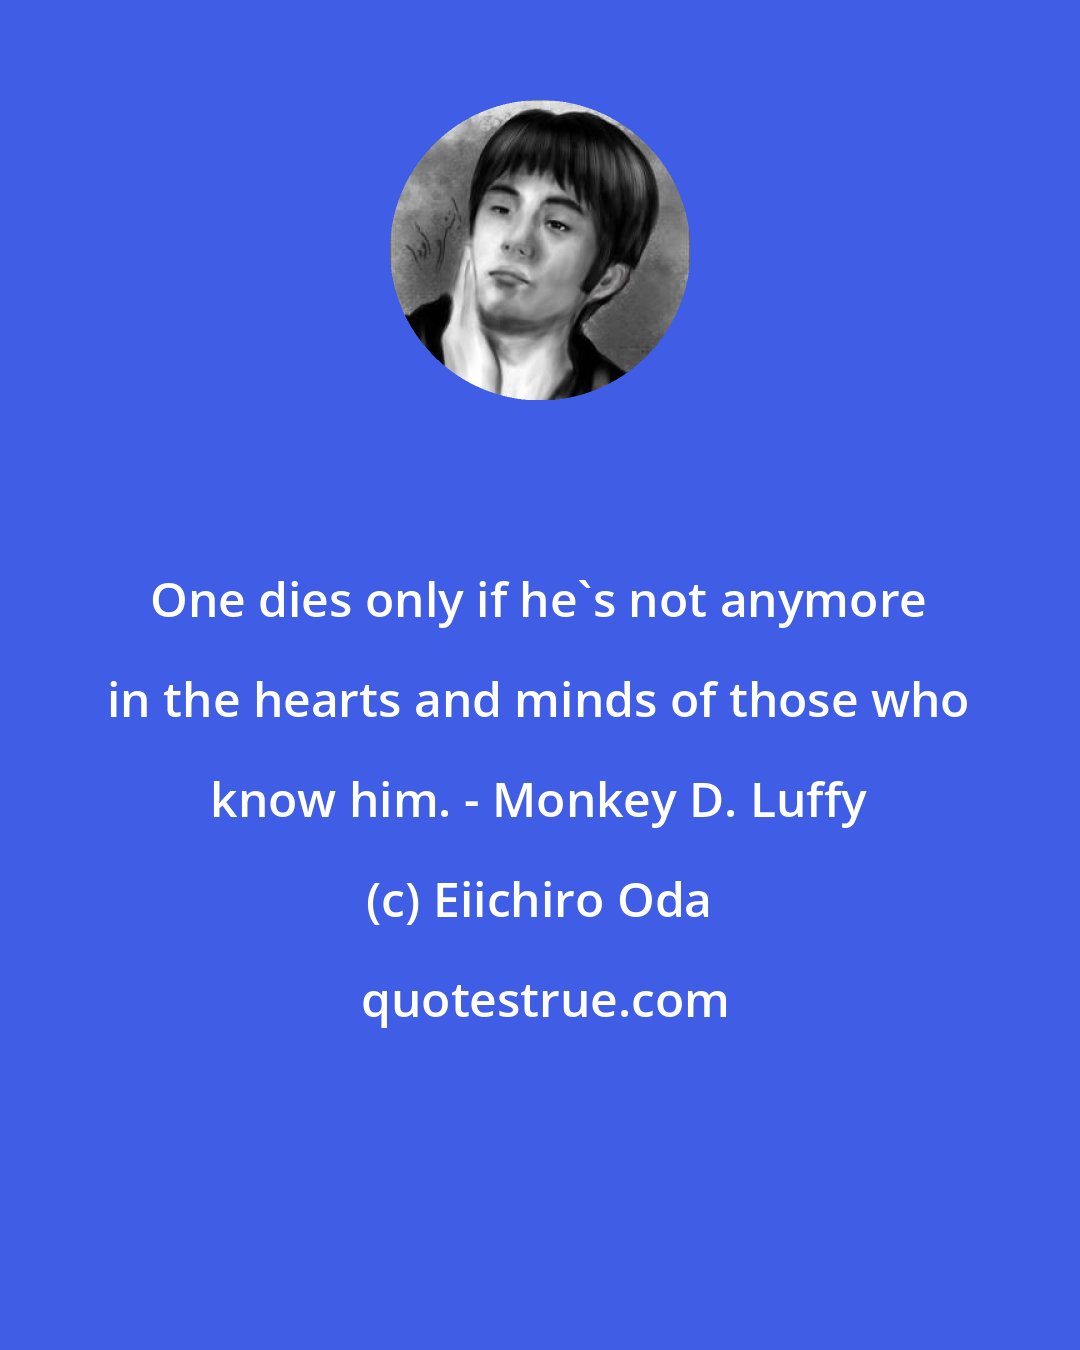 Eiichiro Oda: One dies only if he's not anymore in the hearts and minds of those who know him. - Monkey D. Luffy